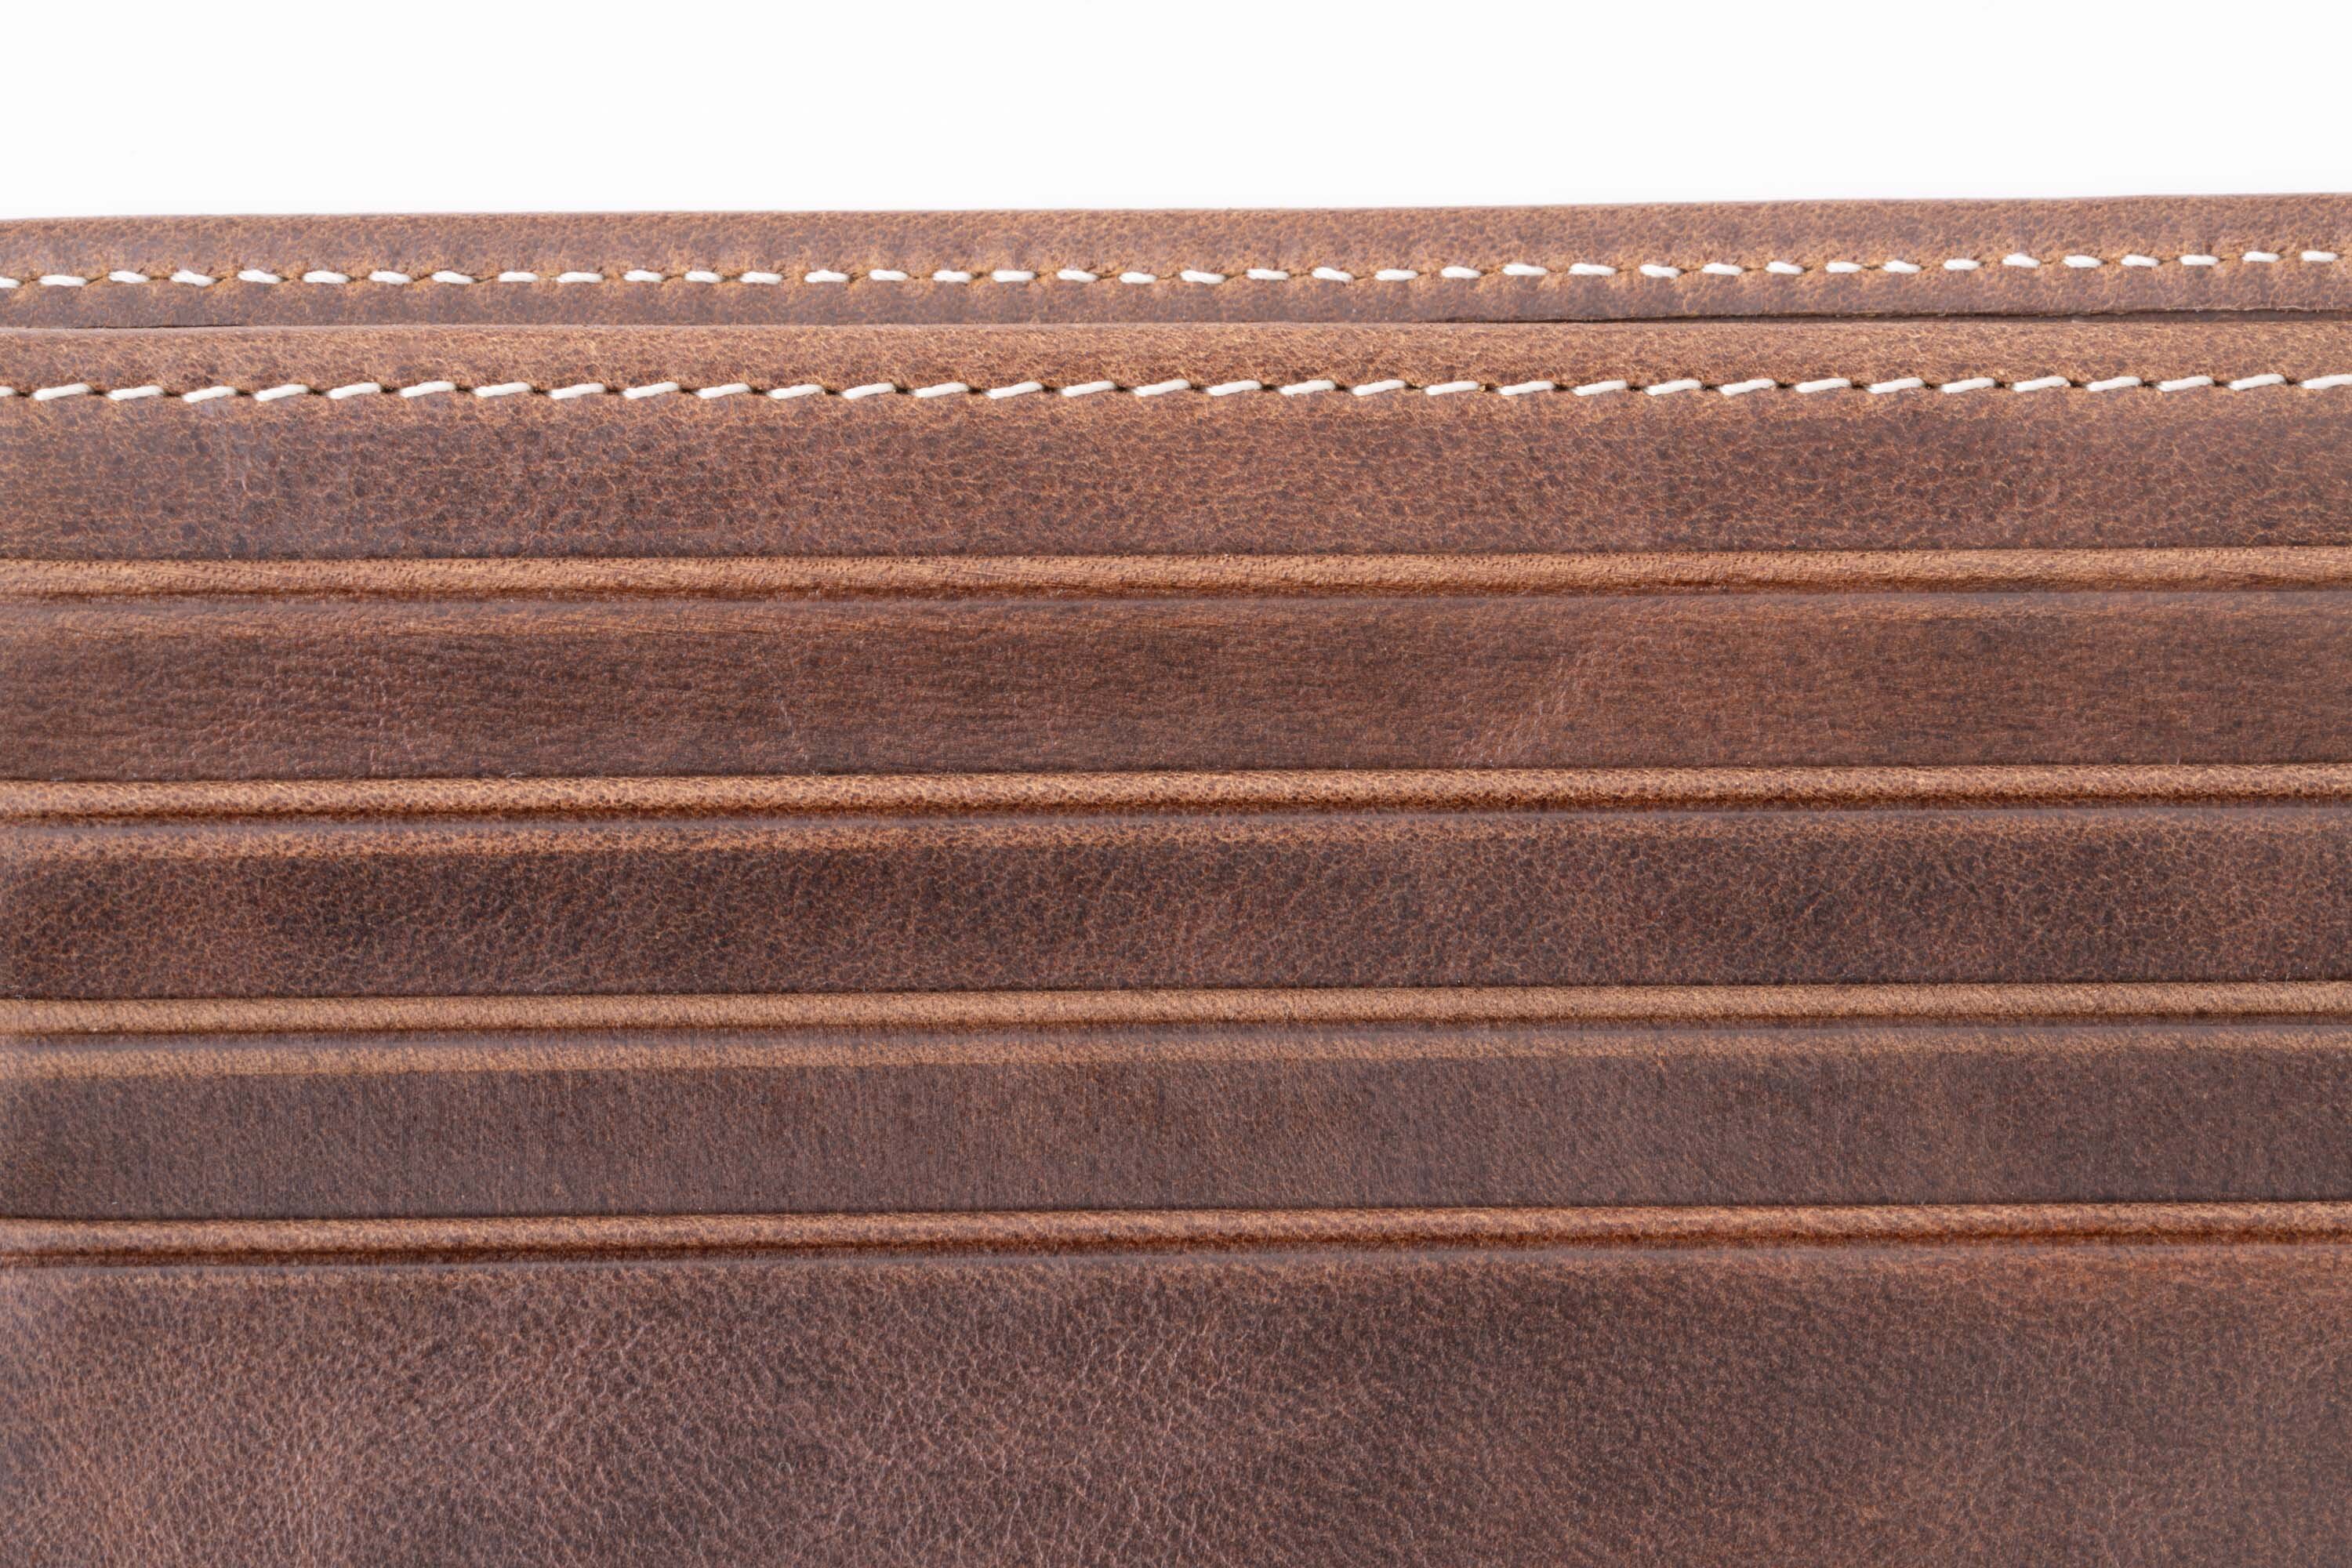 Antique Mahogany Wallet Montecristo Leather with Card Slots 